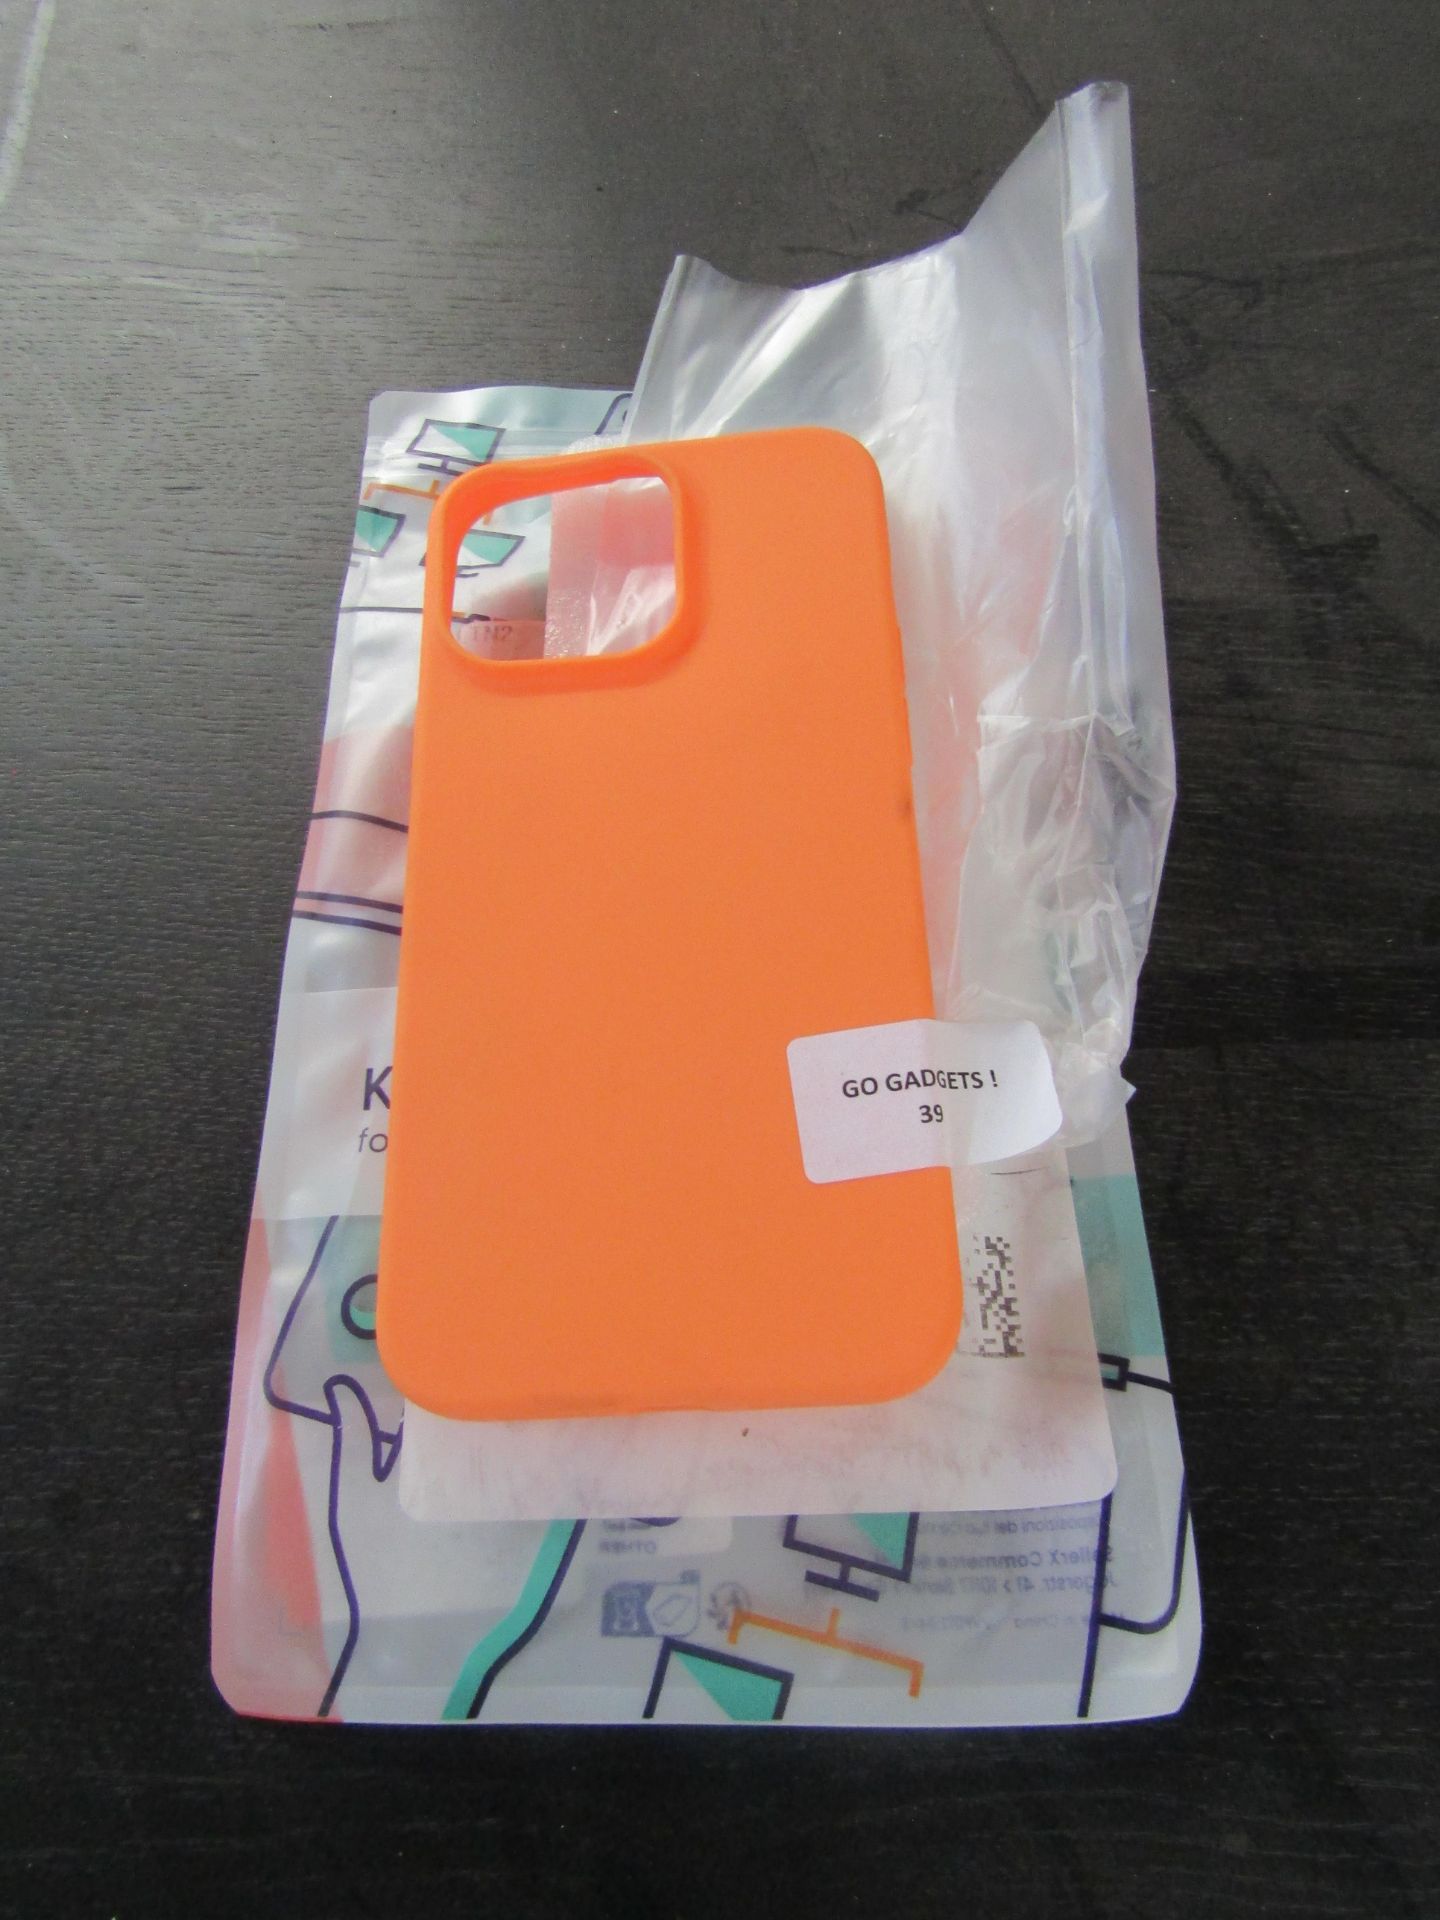 iPhone 6.7" Orange Rubber Case - Good Condition May Be Slightly Dirty.